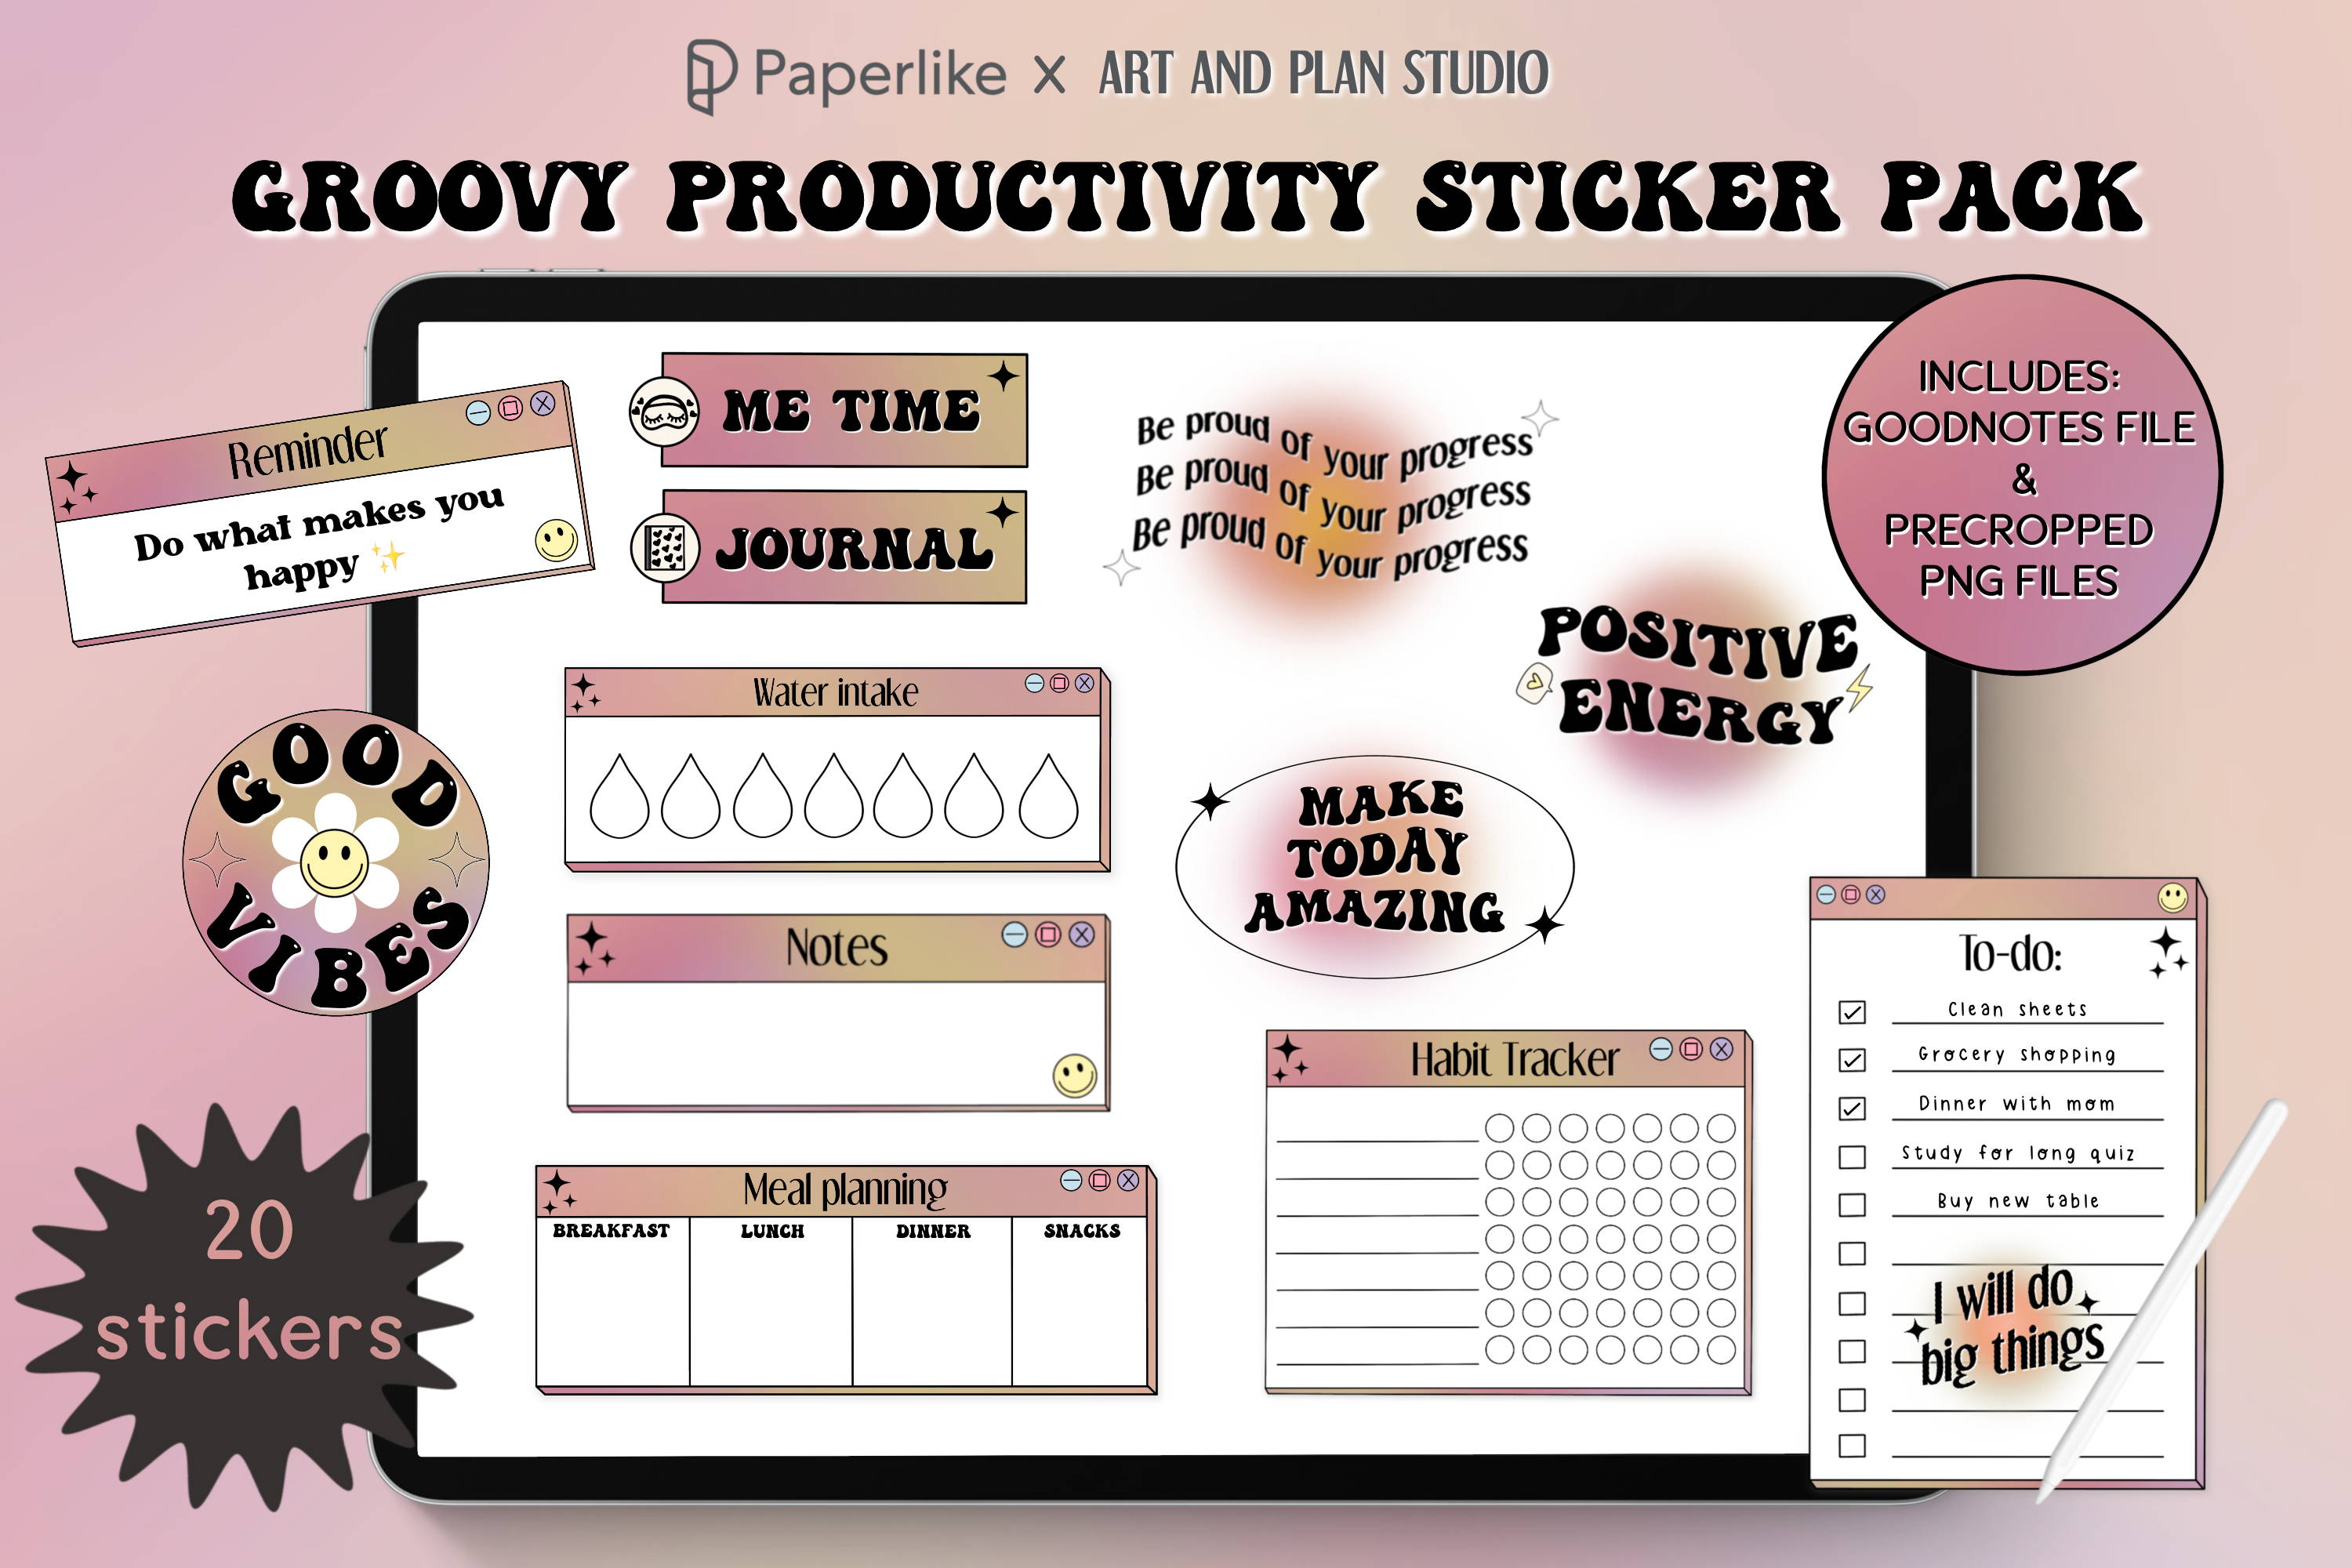 You Are More Than Your Productivity Sticker